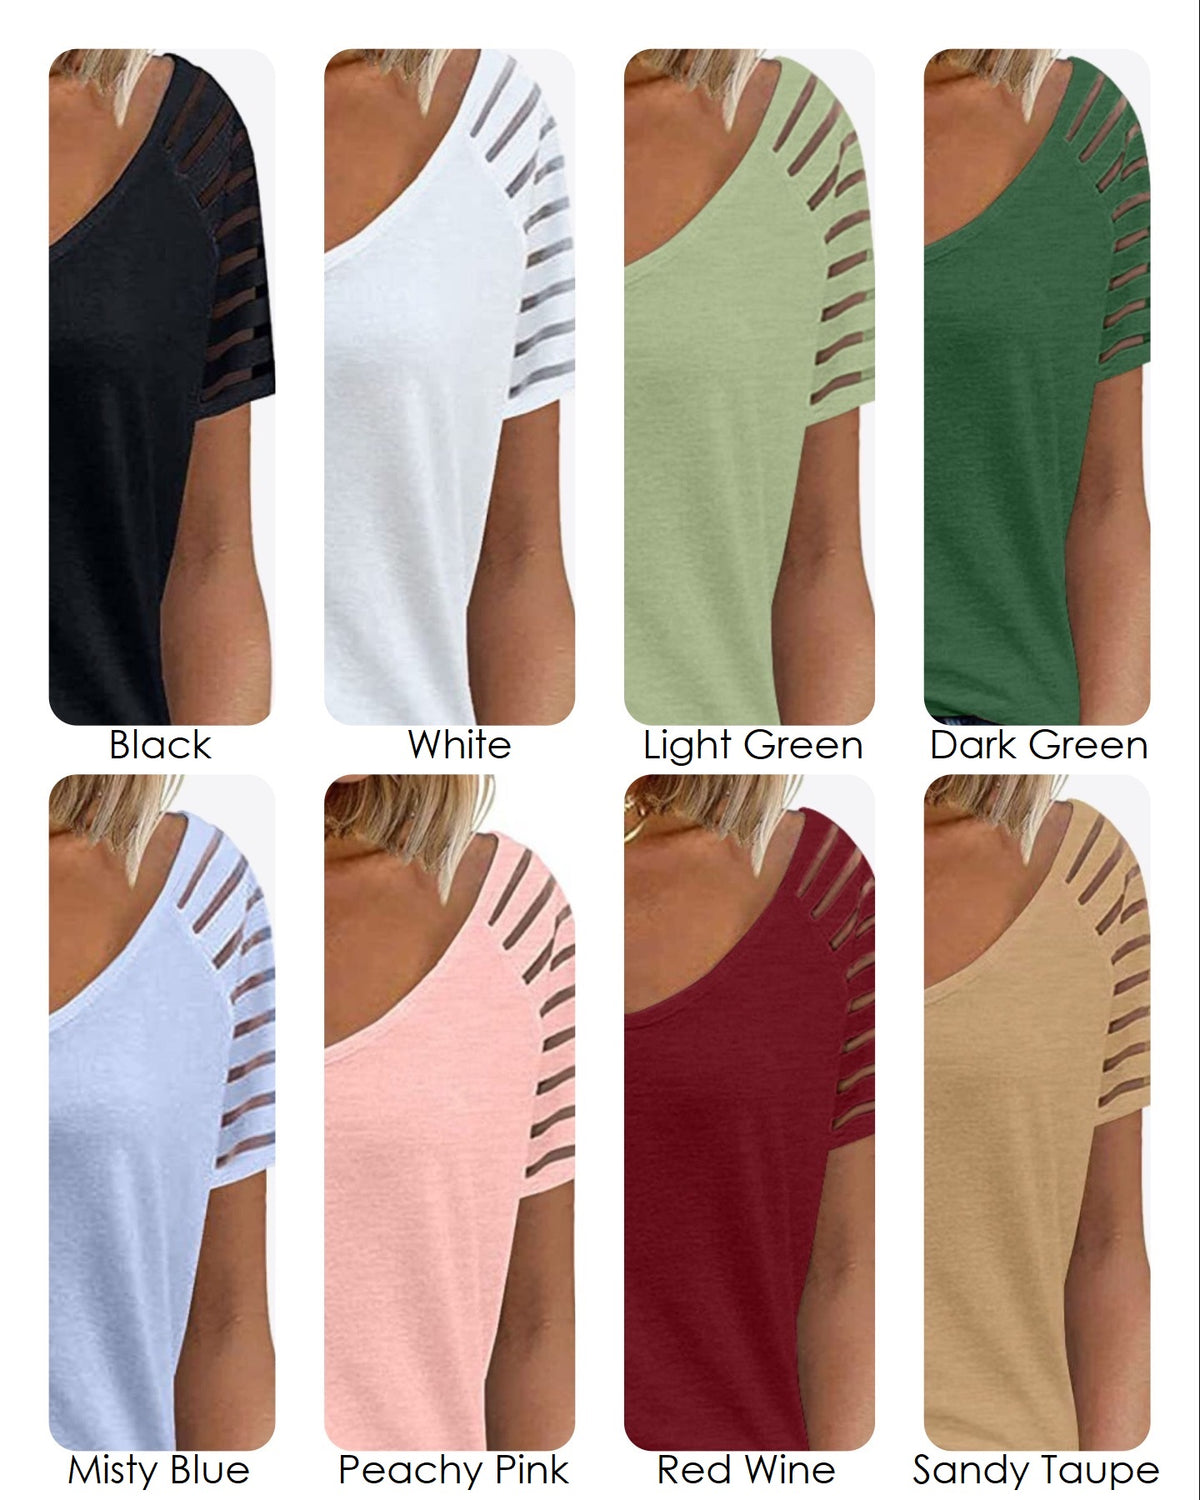 Womens Sheer Striped Sleeve Tee in 8 colors, Very Highly Stretchy Rayon Spandex Blend Fabric Material, True to Size Fit, Shortsleeve Tee, V-Neckline